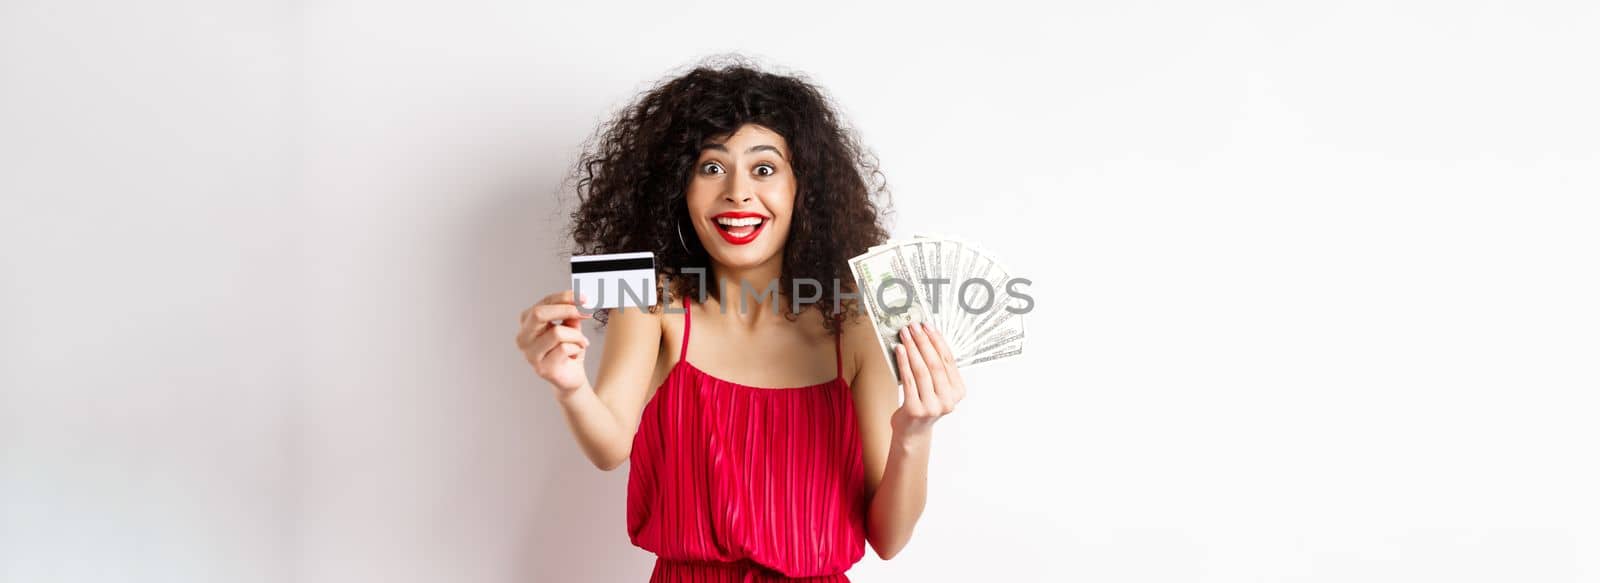 Shopping. Excited curly-haired woman in red dress, holding money but showing plastic credit card with happy smile, white background.